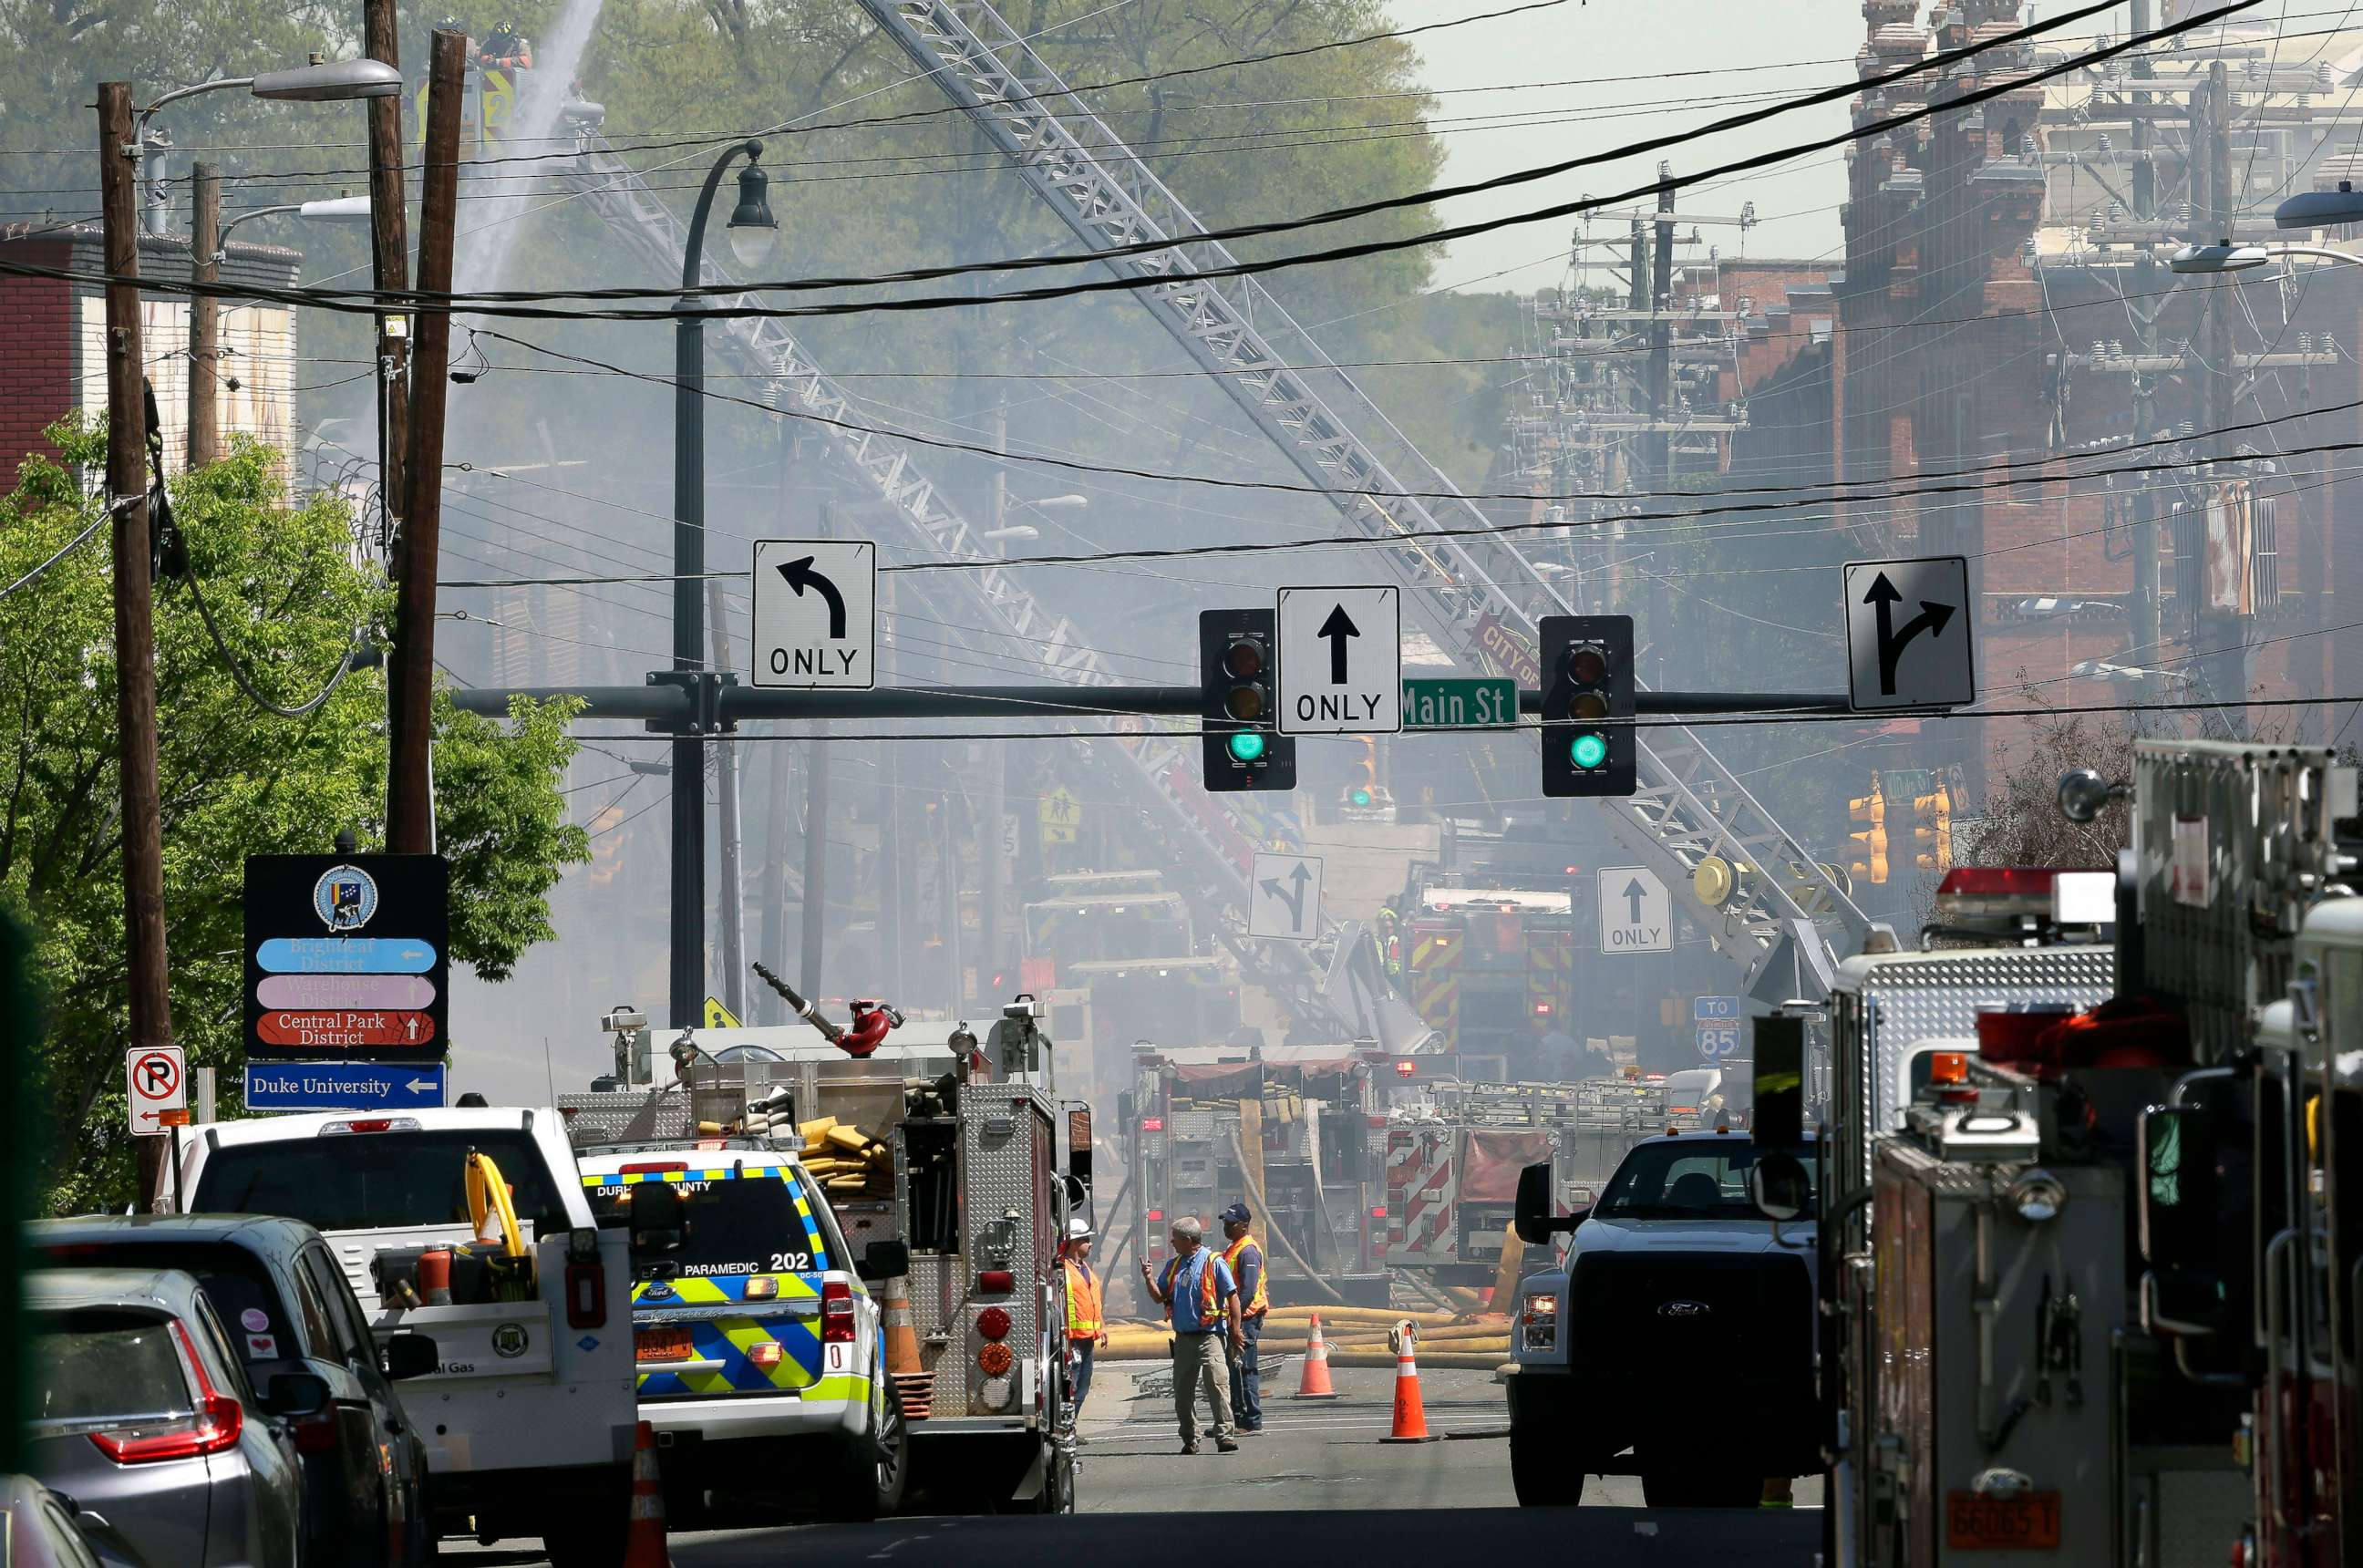 PHOTO: Firefighters and emergency personnel work the scene of an explosion and building fire in downtown Durham, N.C., April 10, 2019.